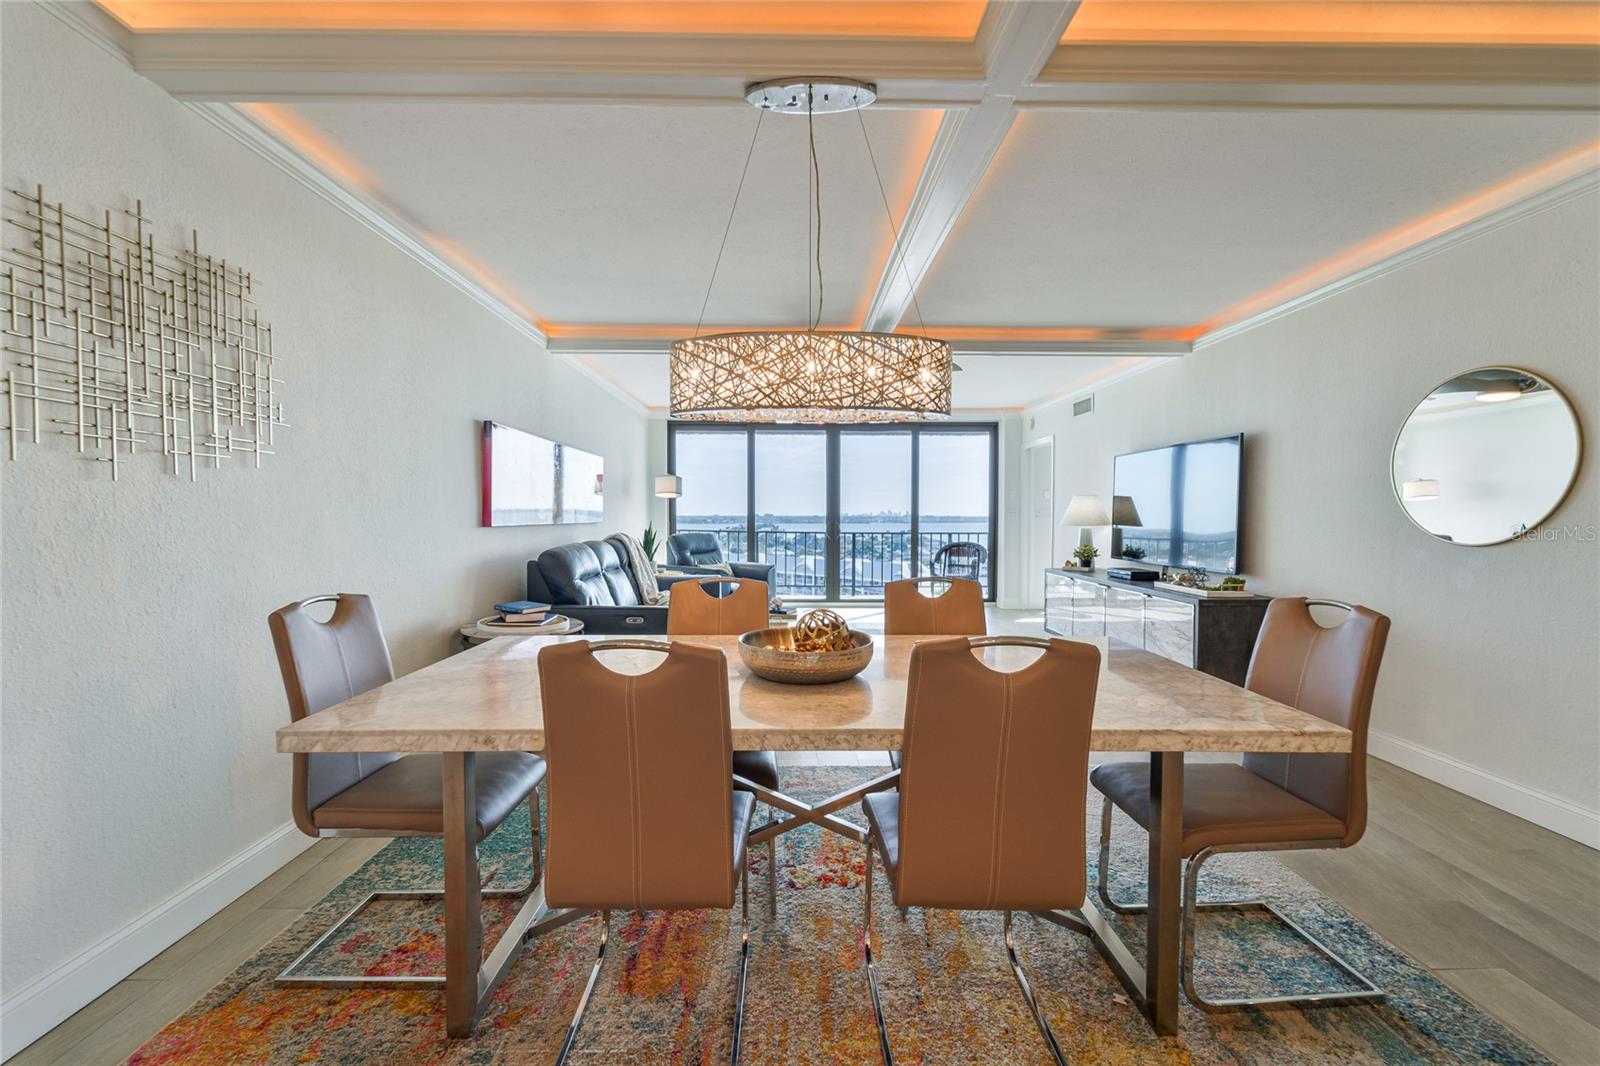 Dining area that easily accommodates a large table.